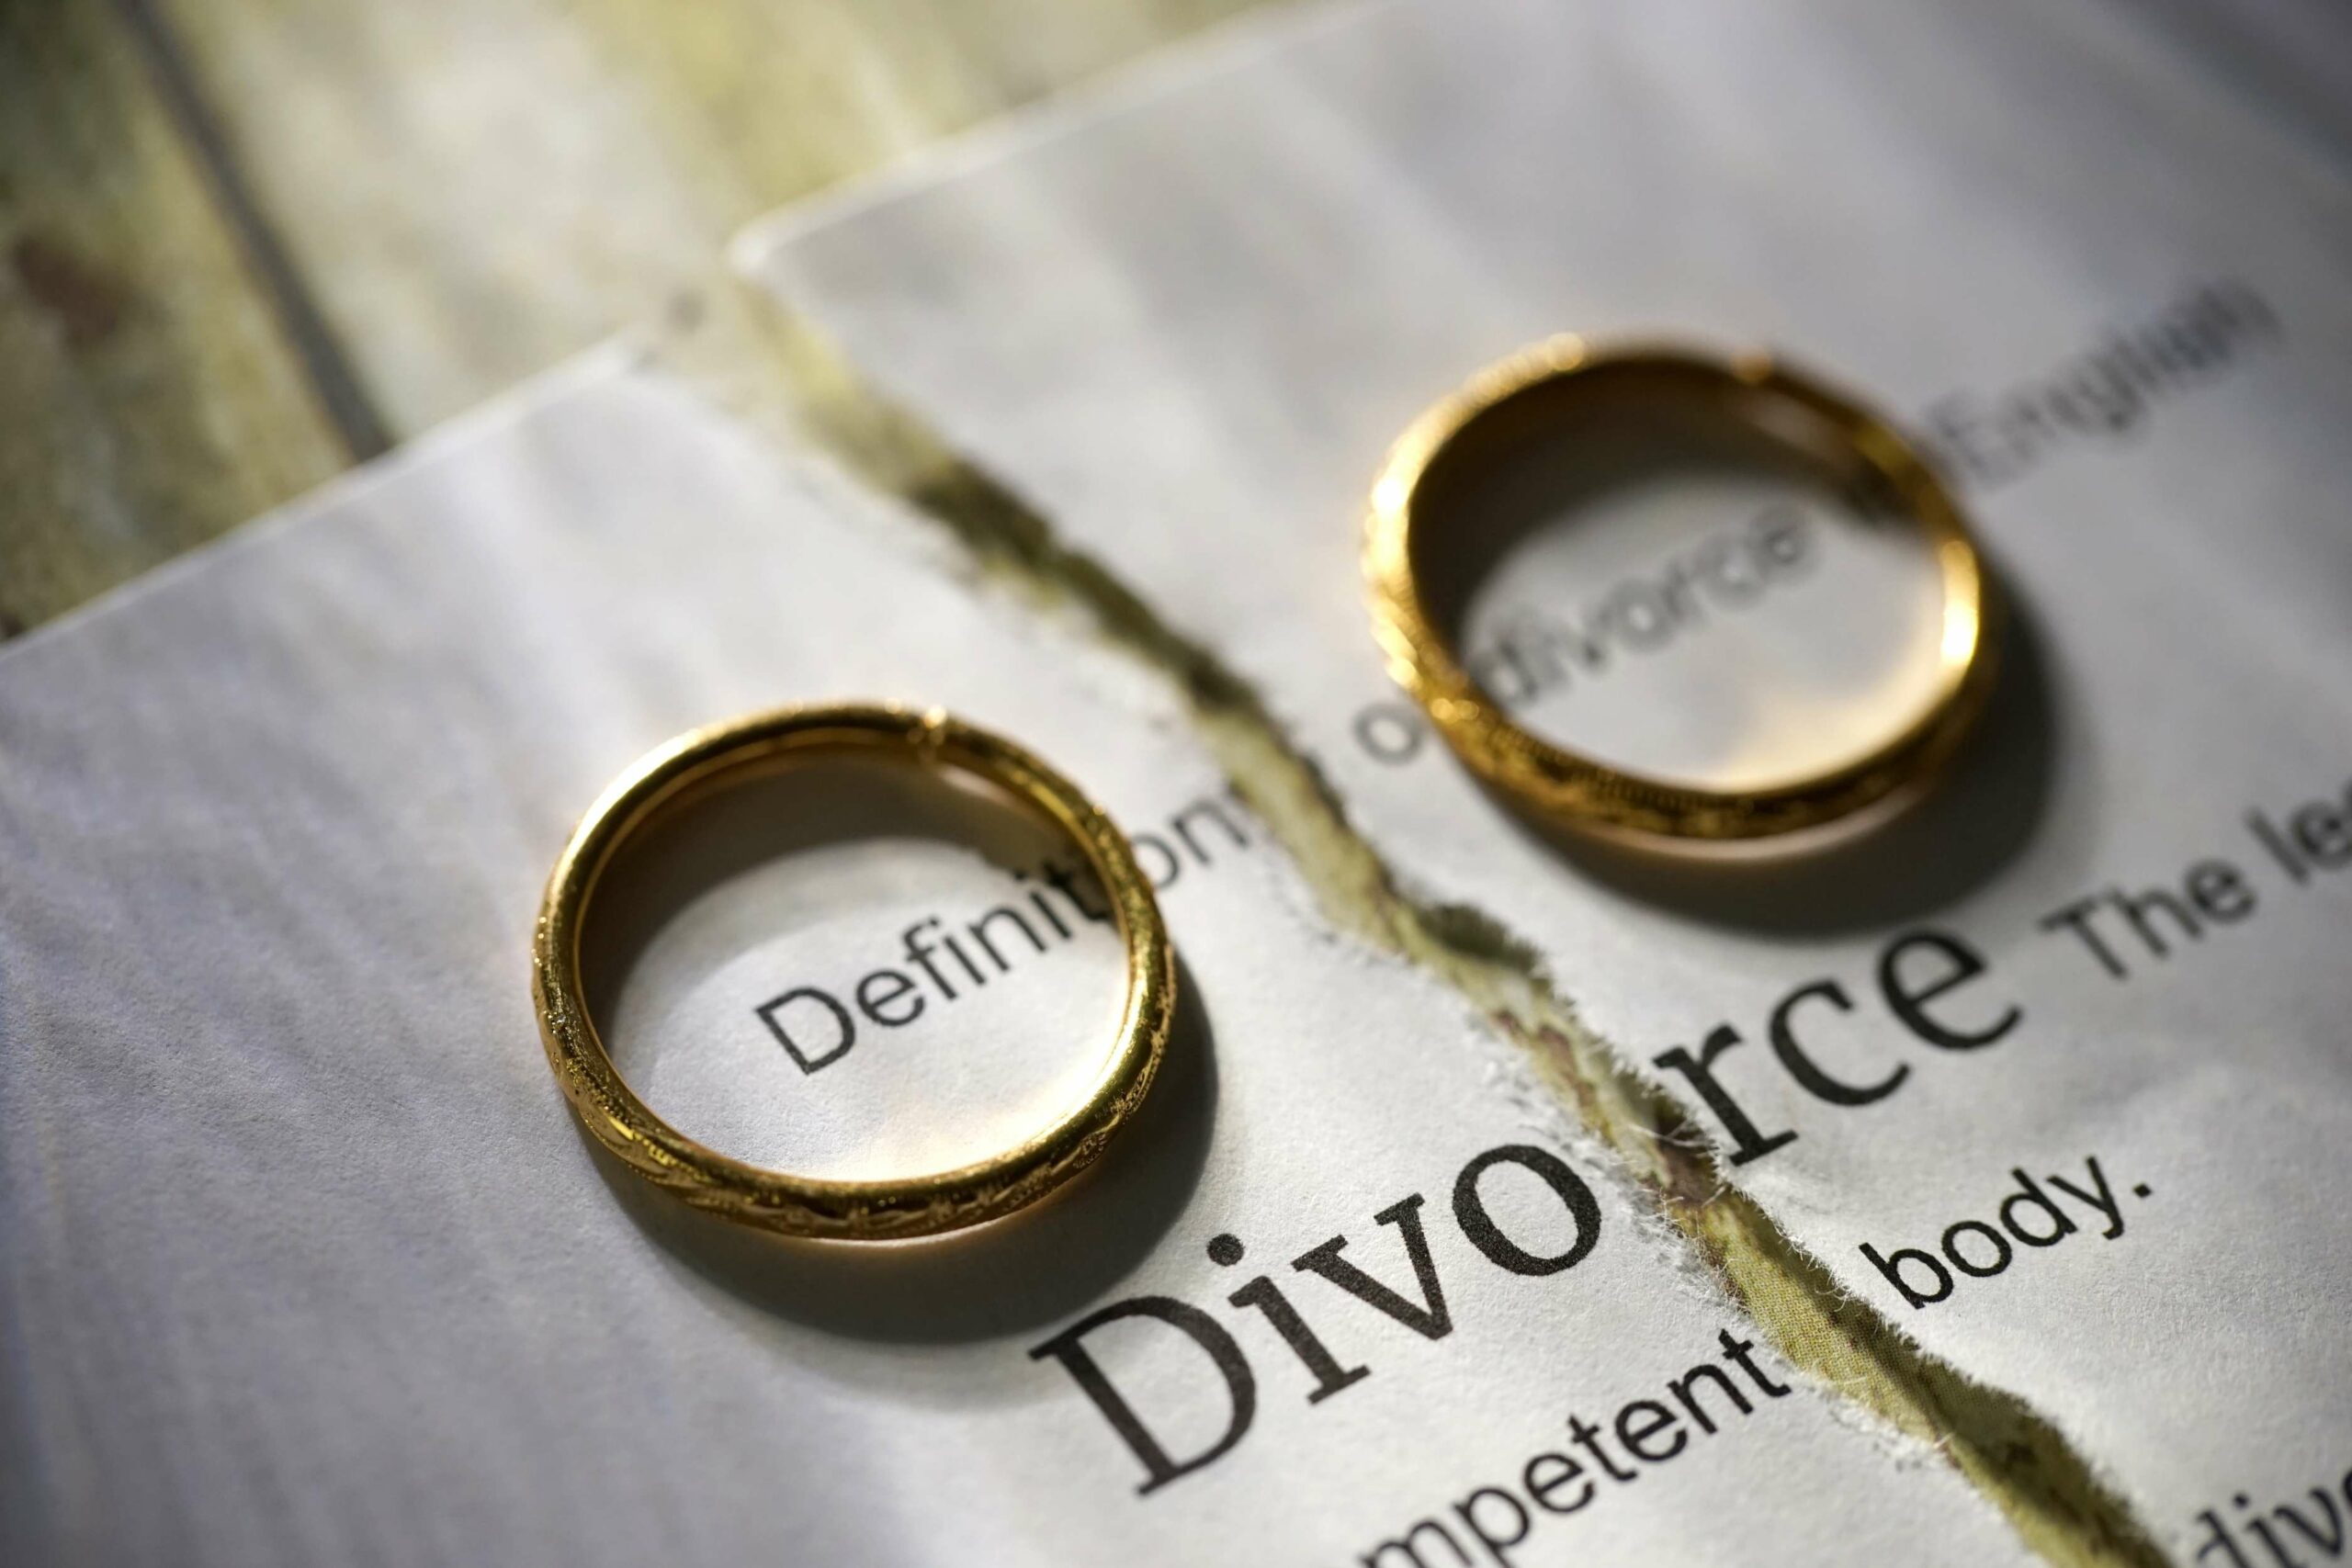 A sheet of paper with 'divorce' written on it is ripped in half. A wedding band is placed on either side of the separated paper.